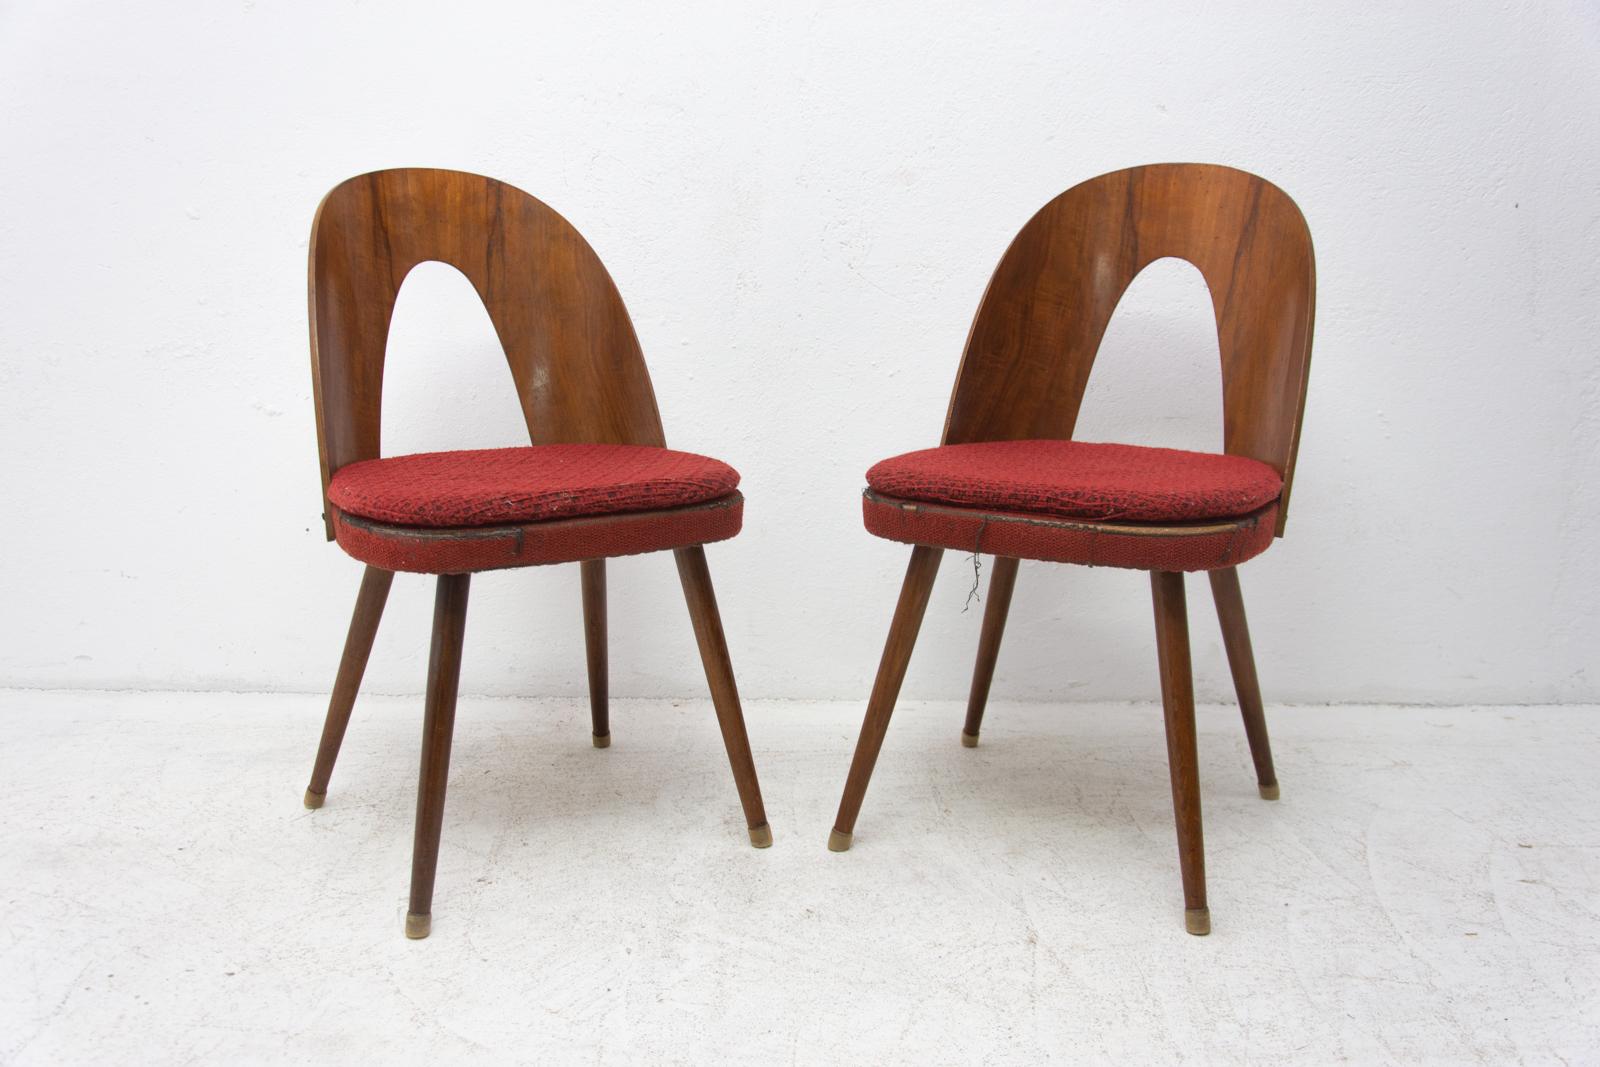 Midcentury bentwood dining chairs designed by Antonín Šuman. The chairs are upholstered, have bent plywood backrests in a walnut veneer and beechwood legs. It was made in the former Czechoslovakia in the 1960s. The chairs are in good vintage